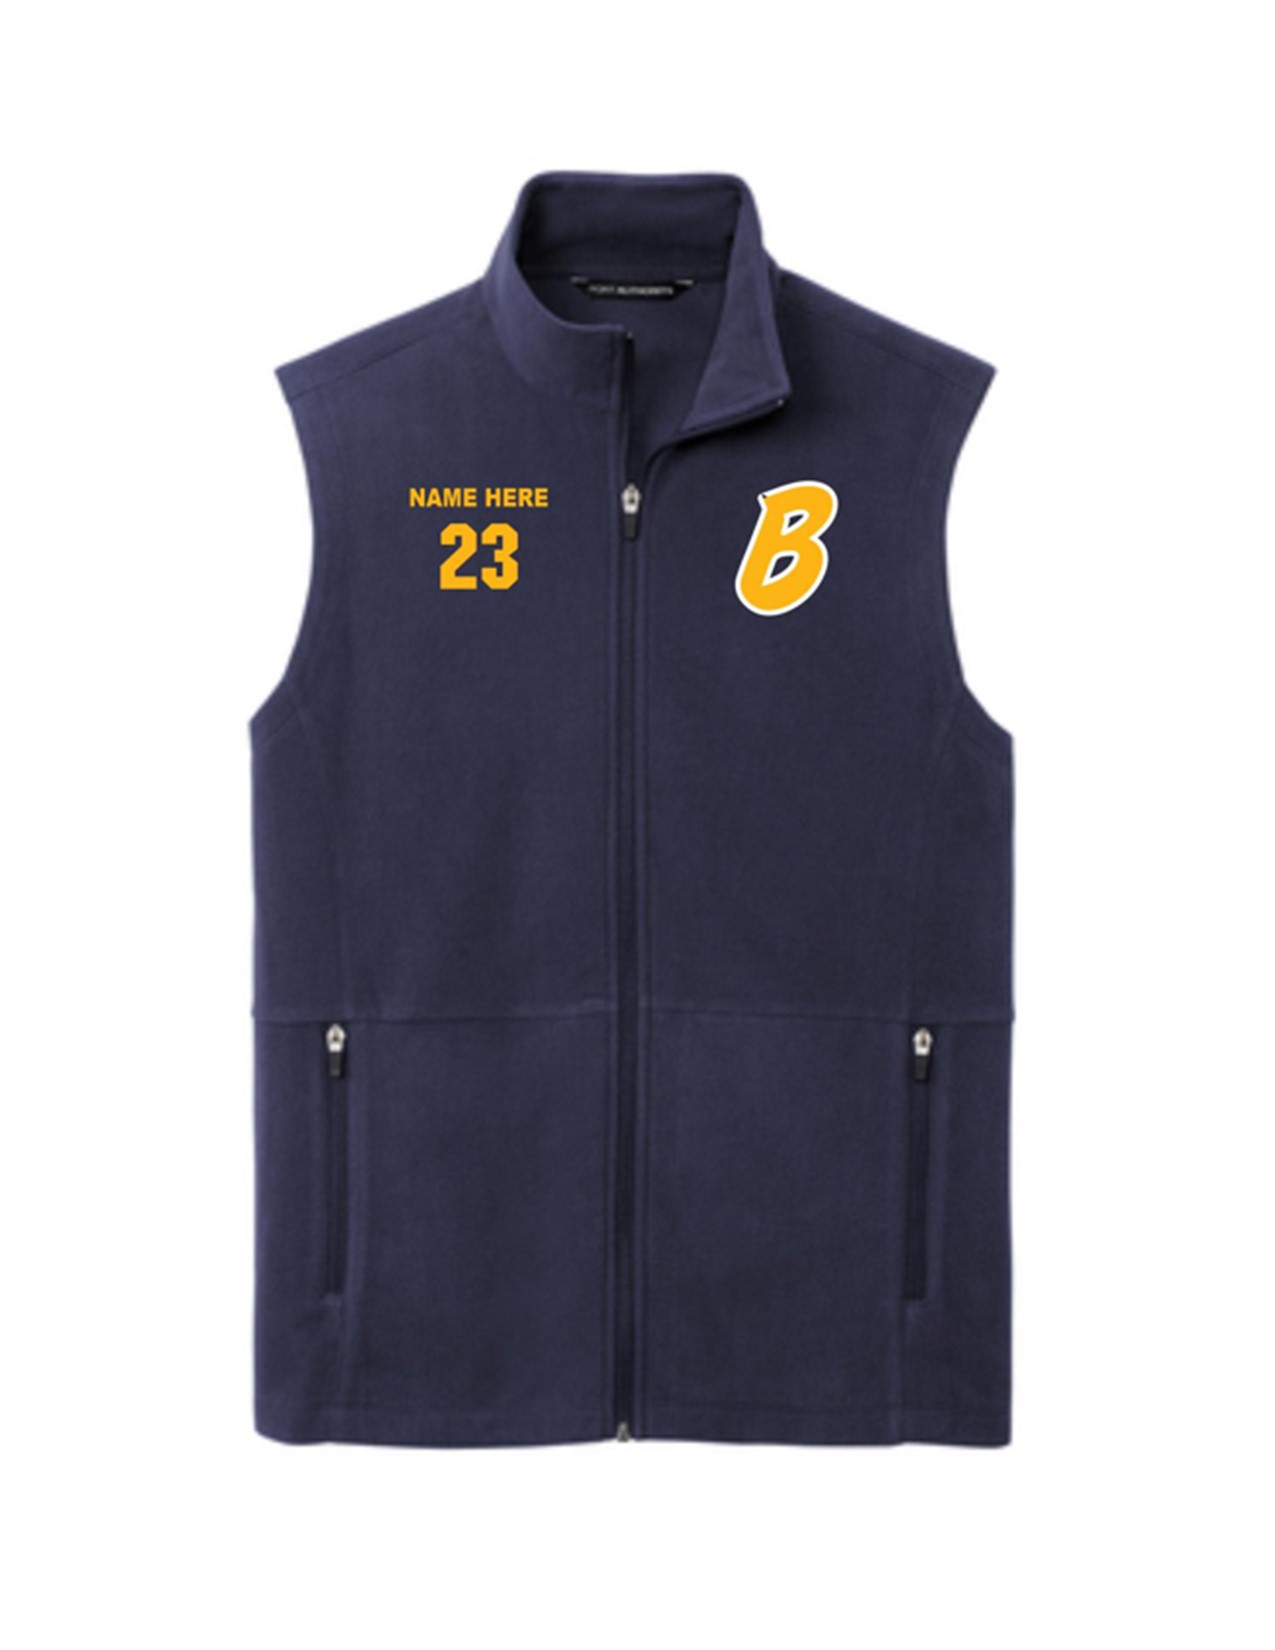 94 Port Authority F152 Men's Accord Microfleece Vest with Embroidery